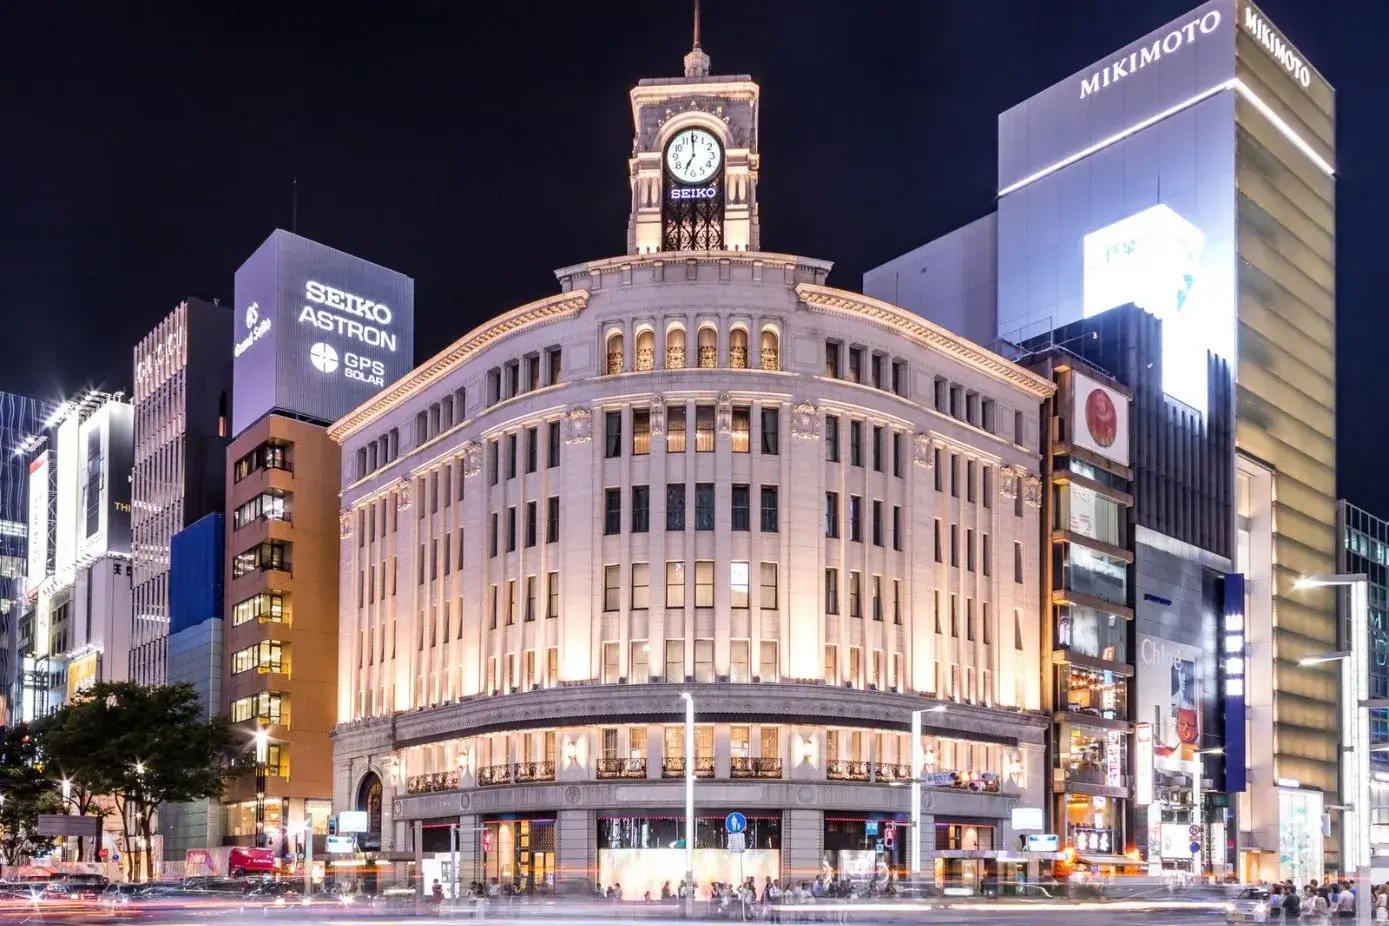 The 13 best places to go to in Tokyo - Ginza